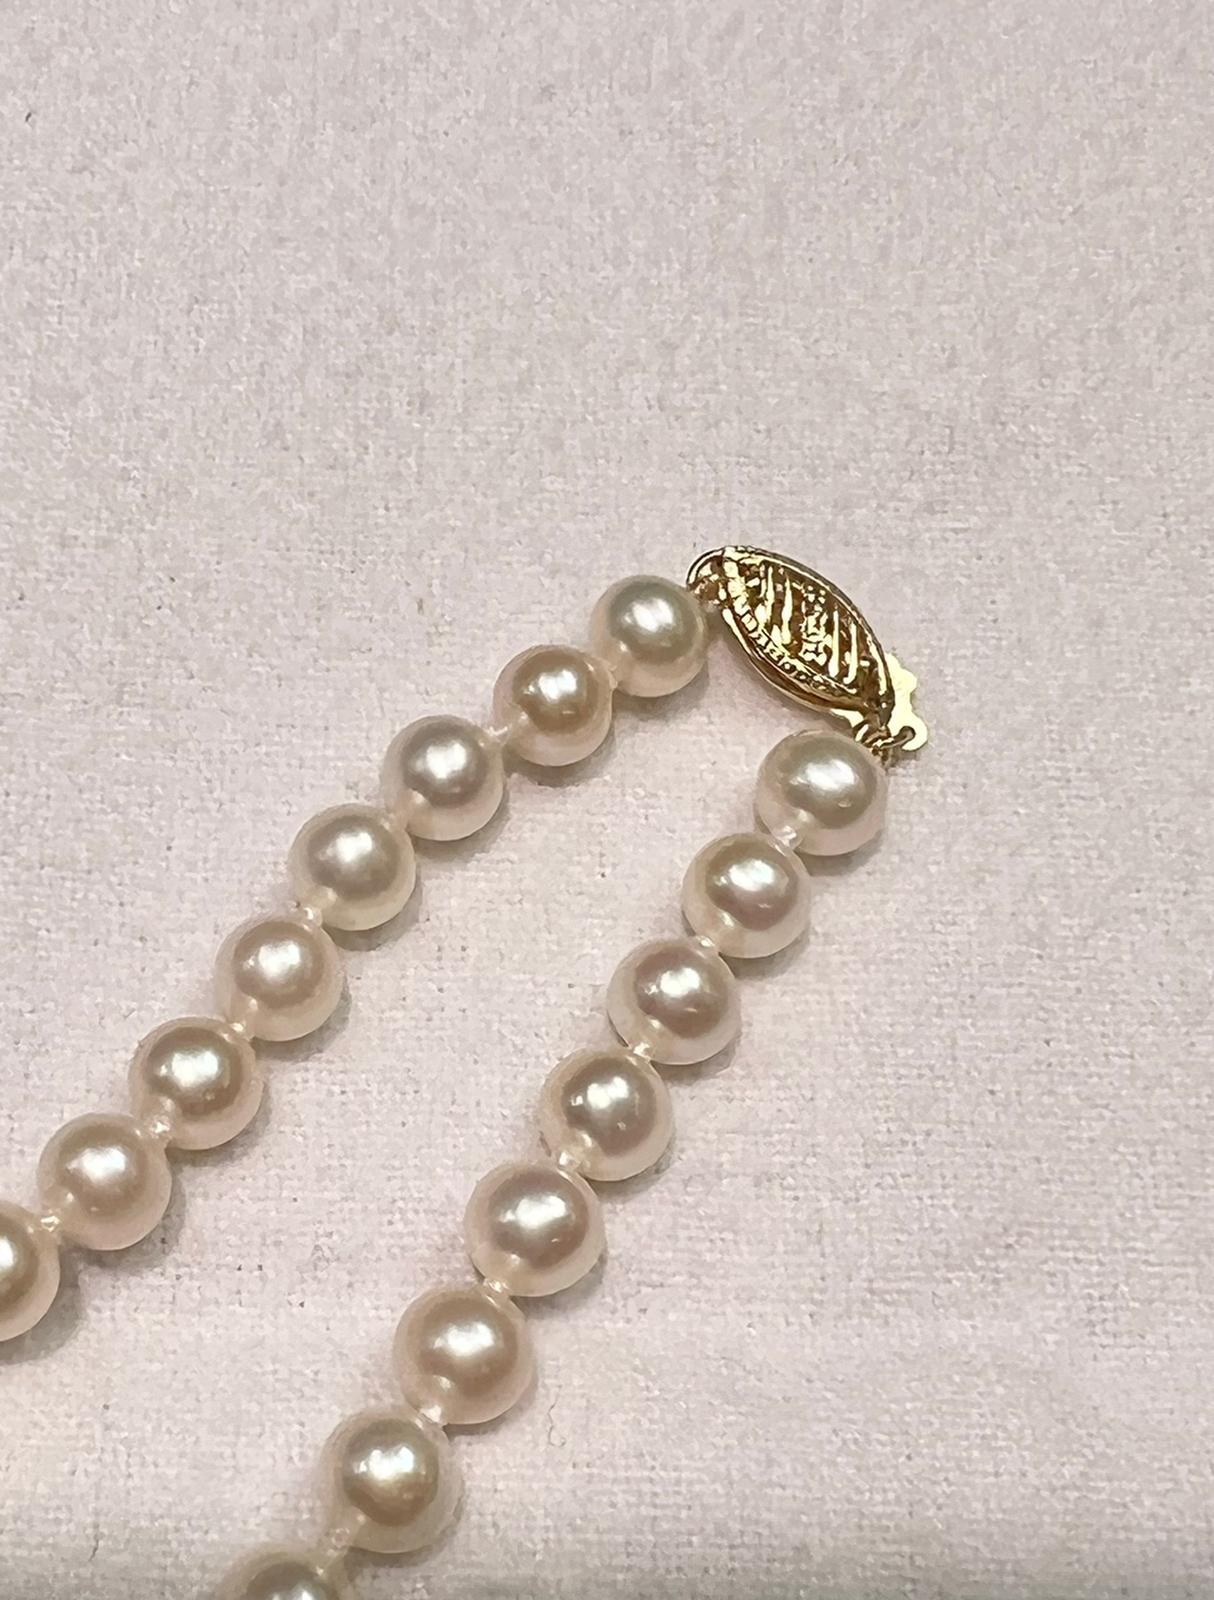 pearl necklace fish hook clasp